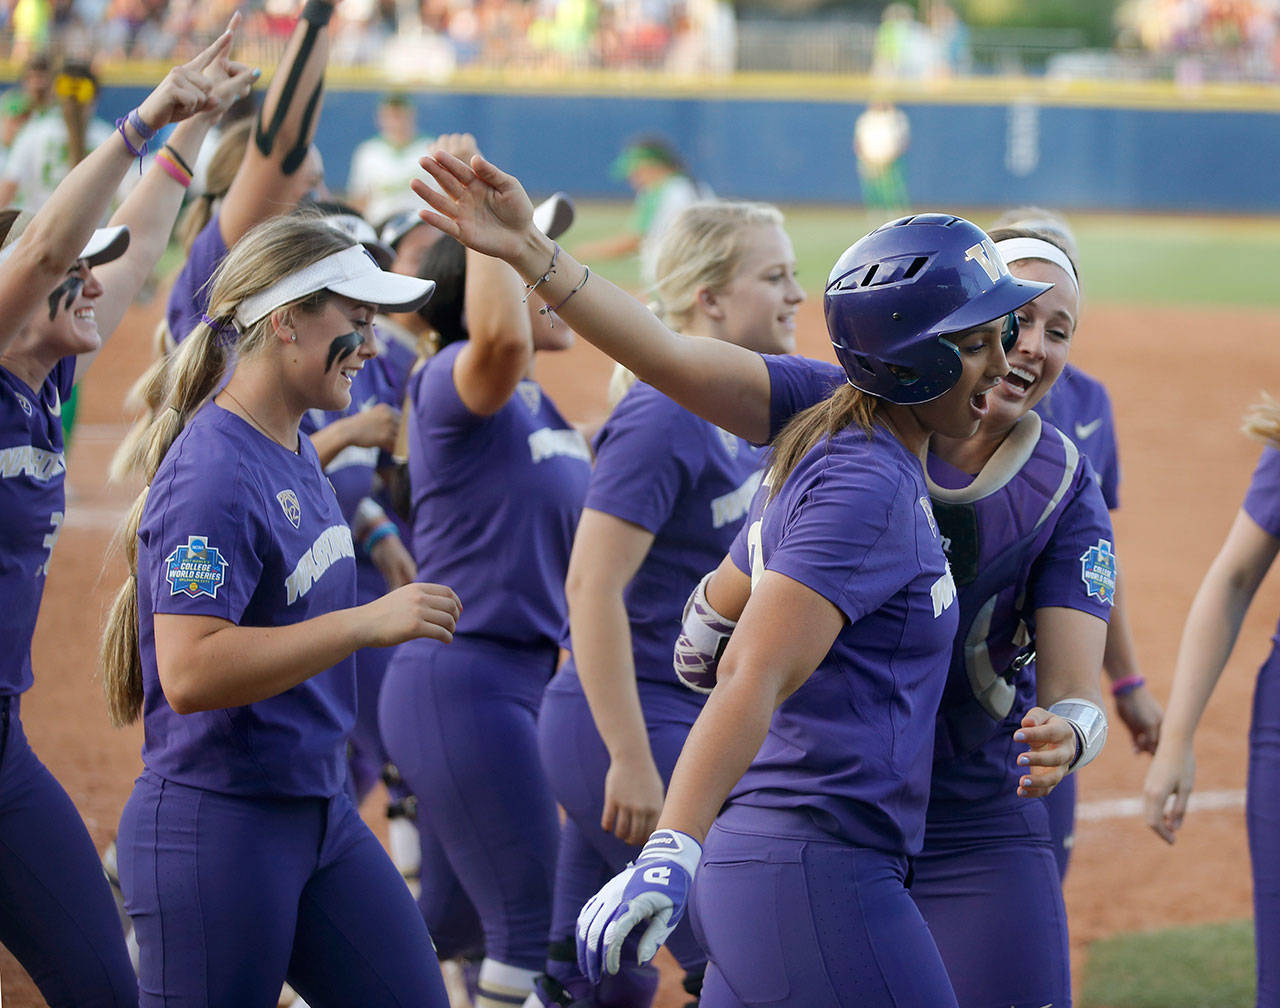 Washington’s Kirstyn Thomas (right front) celebrates with teammates after hitting a two-run home run in the seventh inning against Oregon in an NCAA Women’s College World Series game June 1 in Oklahoma City. (Bryan Terry/The Oklahoman via AP)